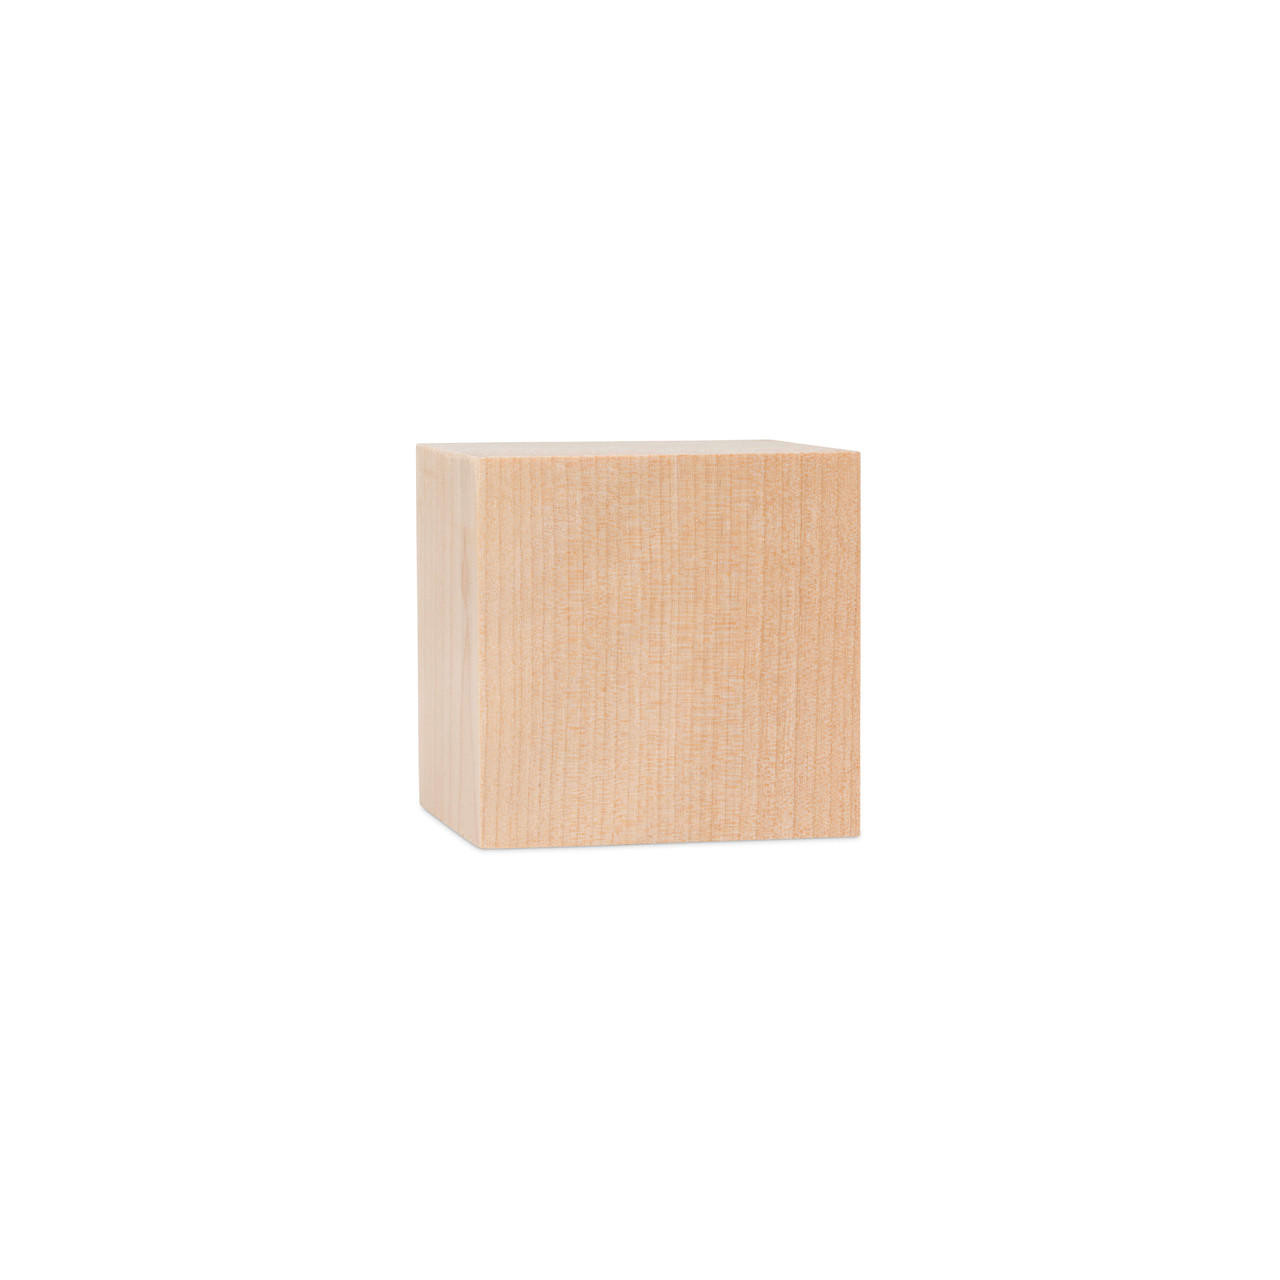 One-Inch Wooden Color Cubes